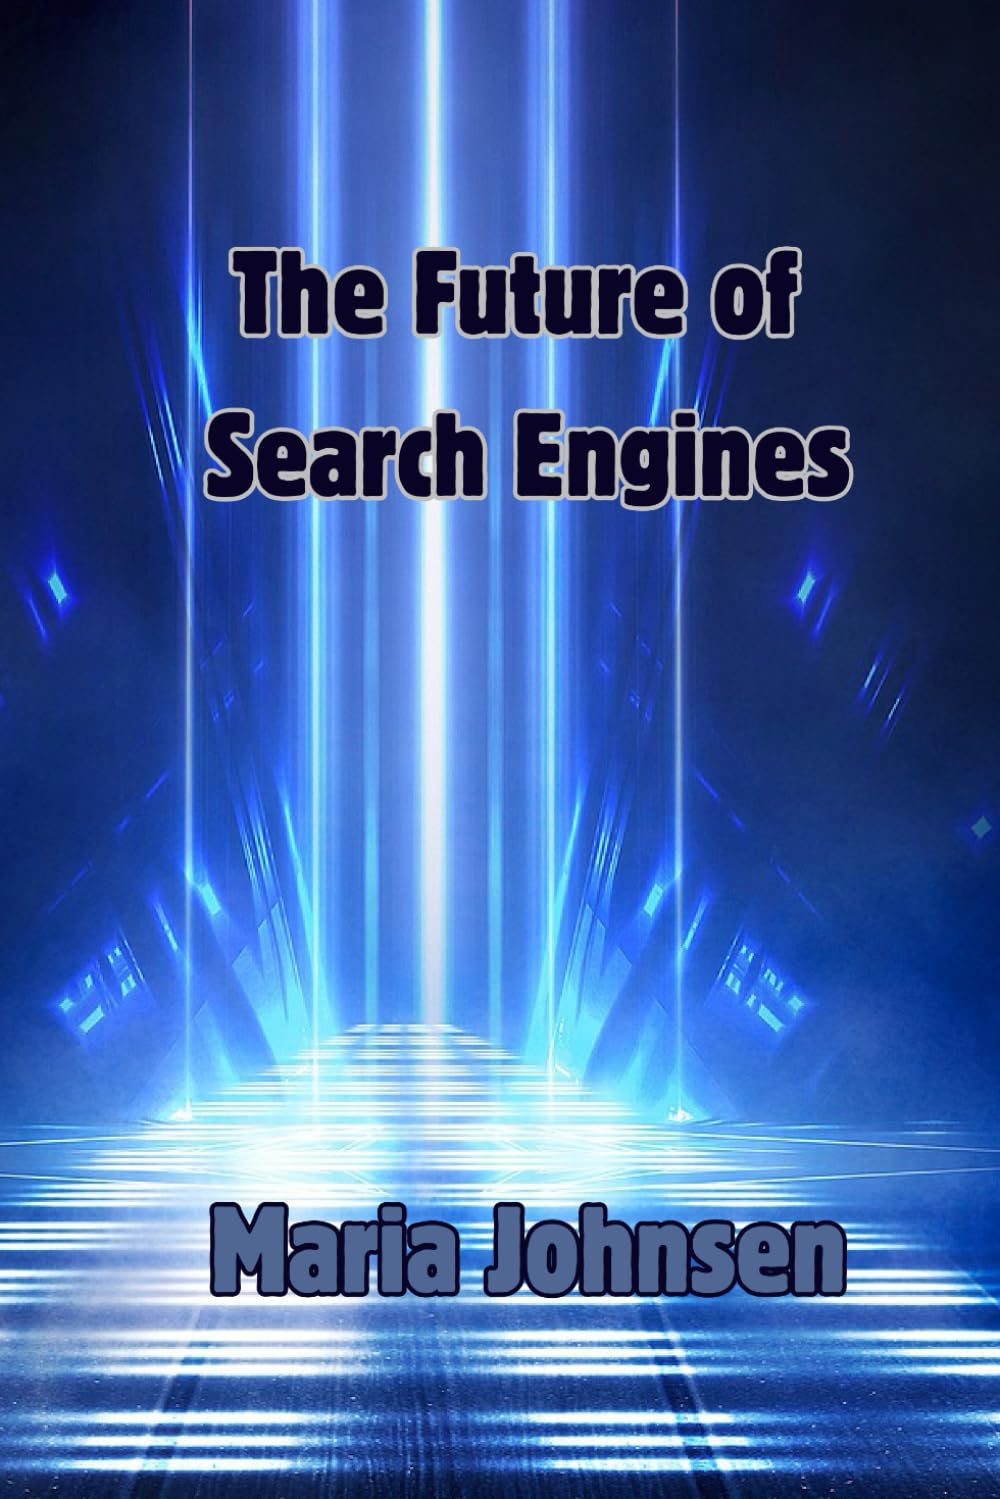 The Future of Search Engines